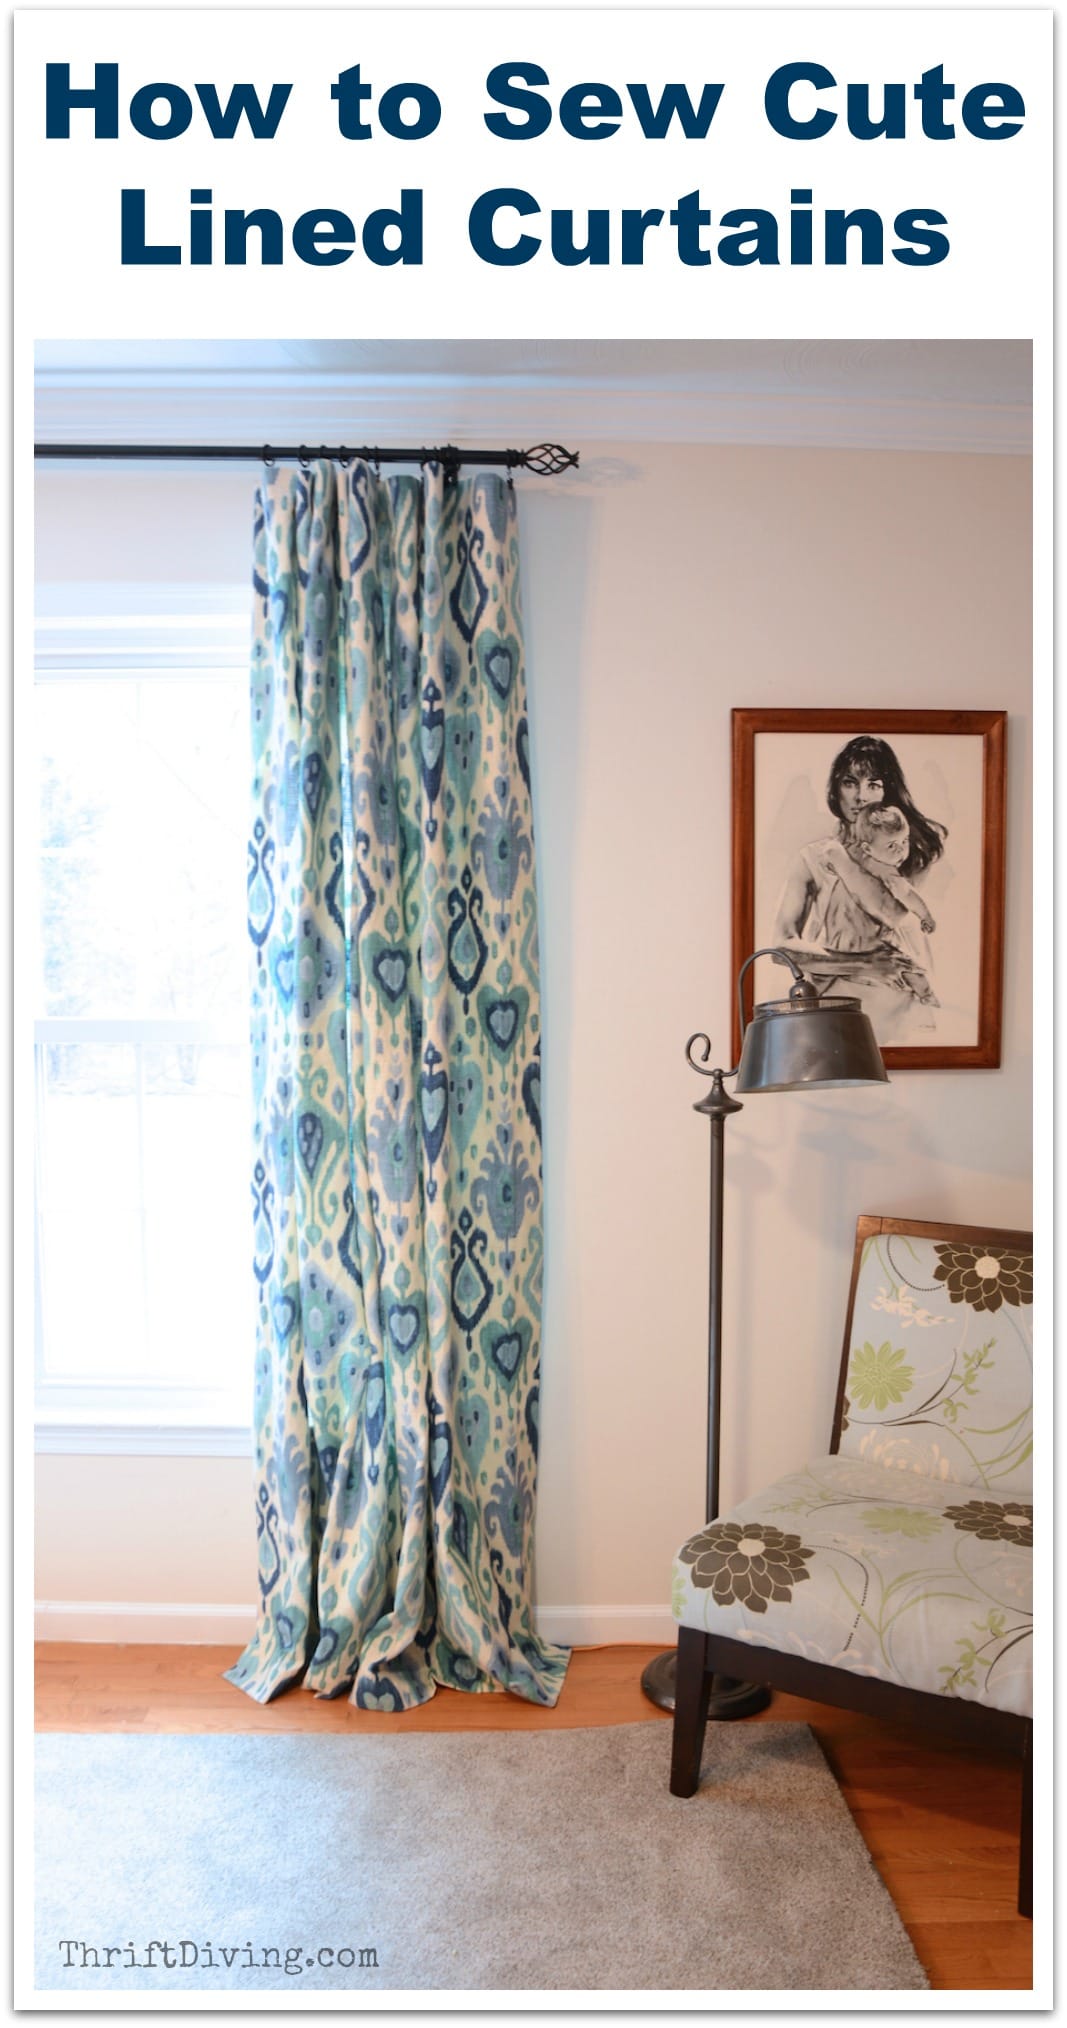 How to Sew Cute Lined Curtains - A tutorial - ThriftDiving.com